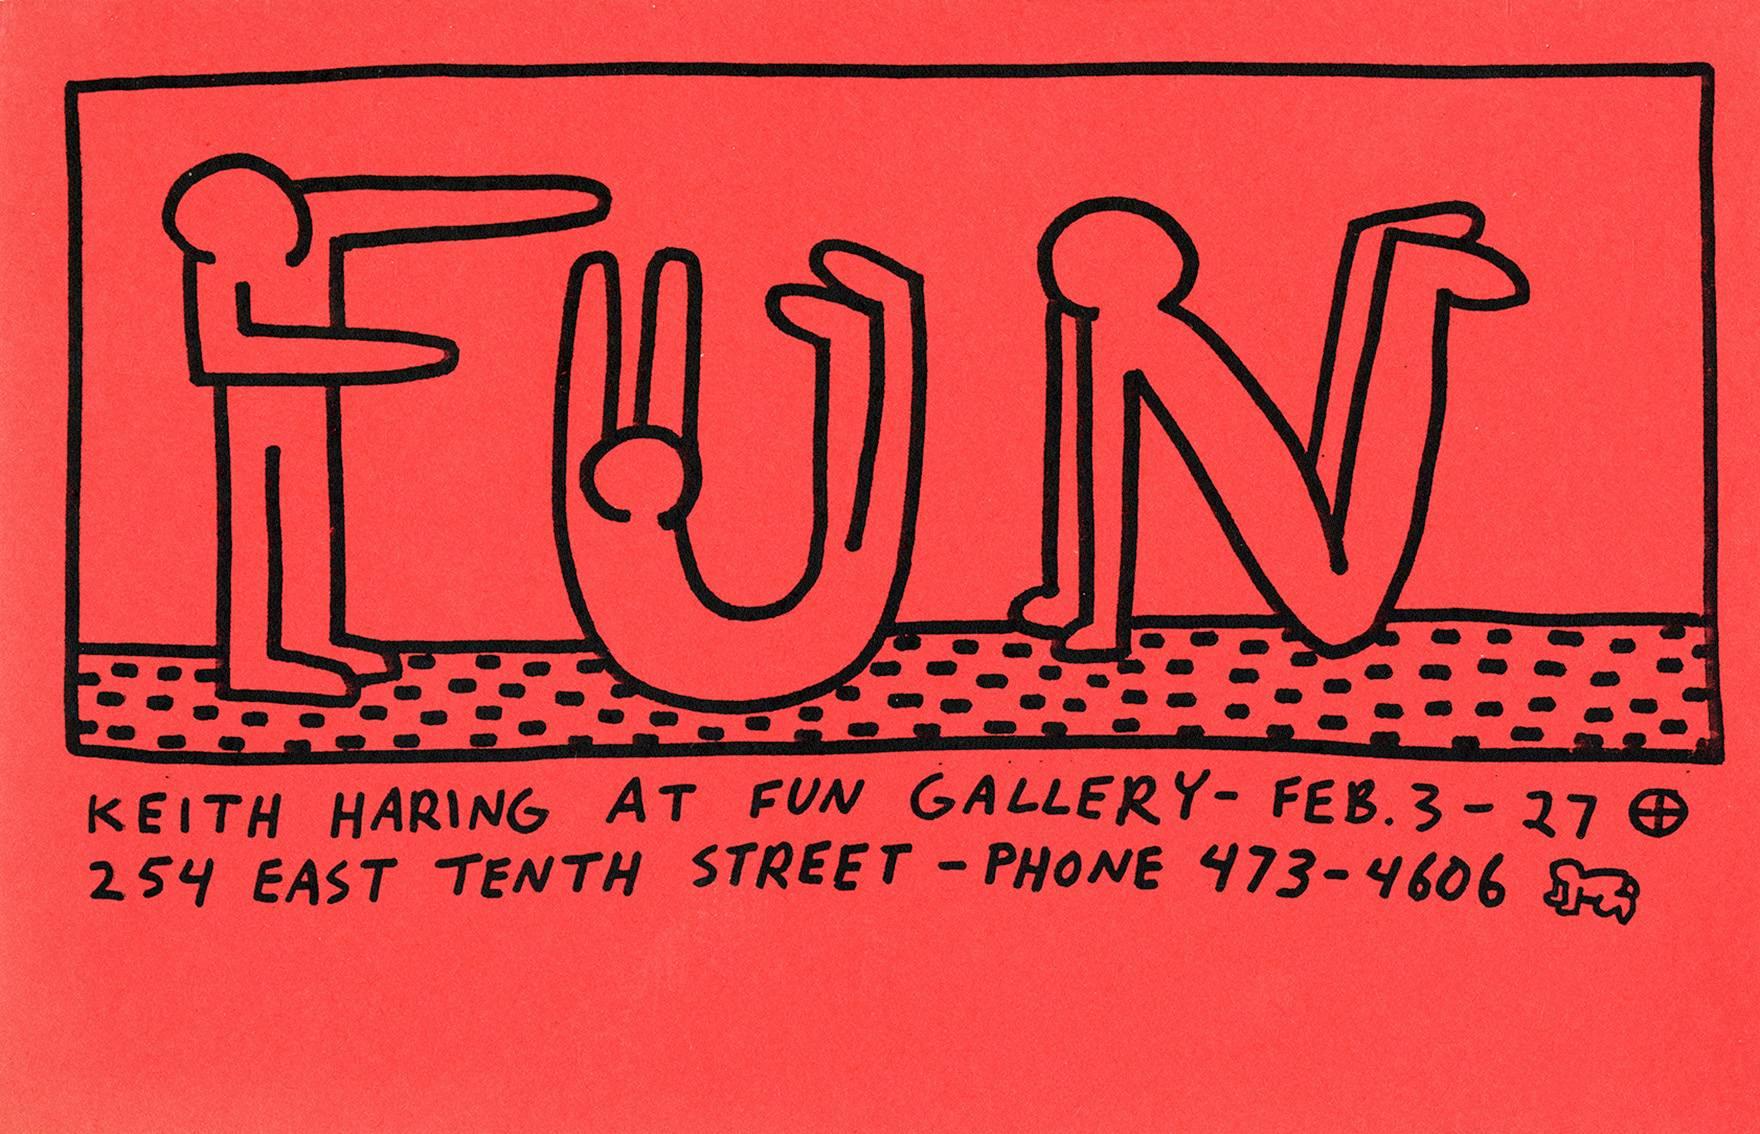 Keith Haring Fun Gallery 1983: 
Rare original 1983 Keith Haring illustrated announcement published on the occasion of Haring's historic 1983 show at the Fun Gallery in the East Village: Keith Haring at Fun Gallery Feb 3 - Feb 27, 1983. A classic